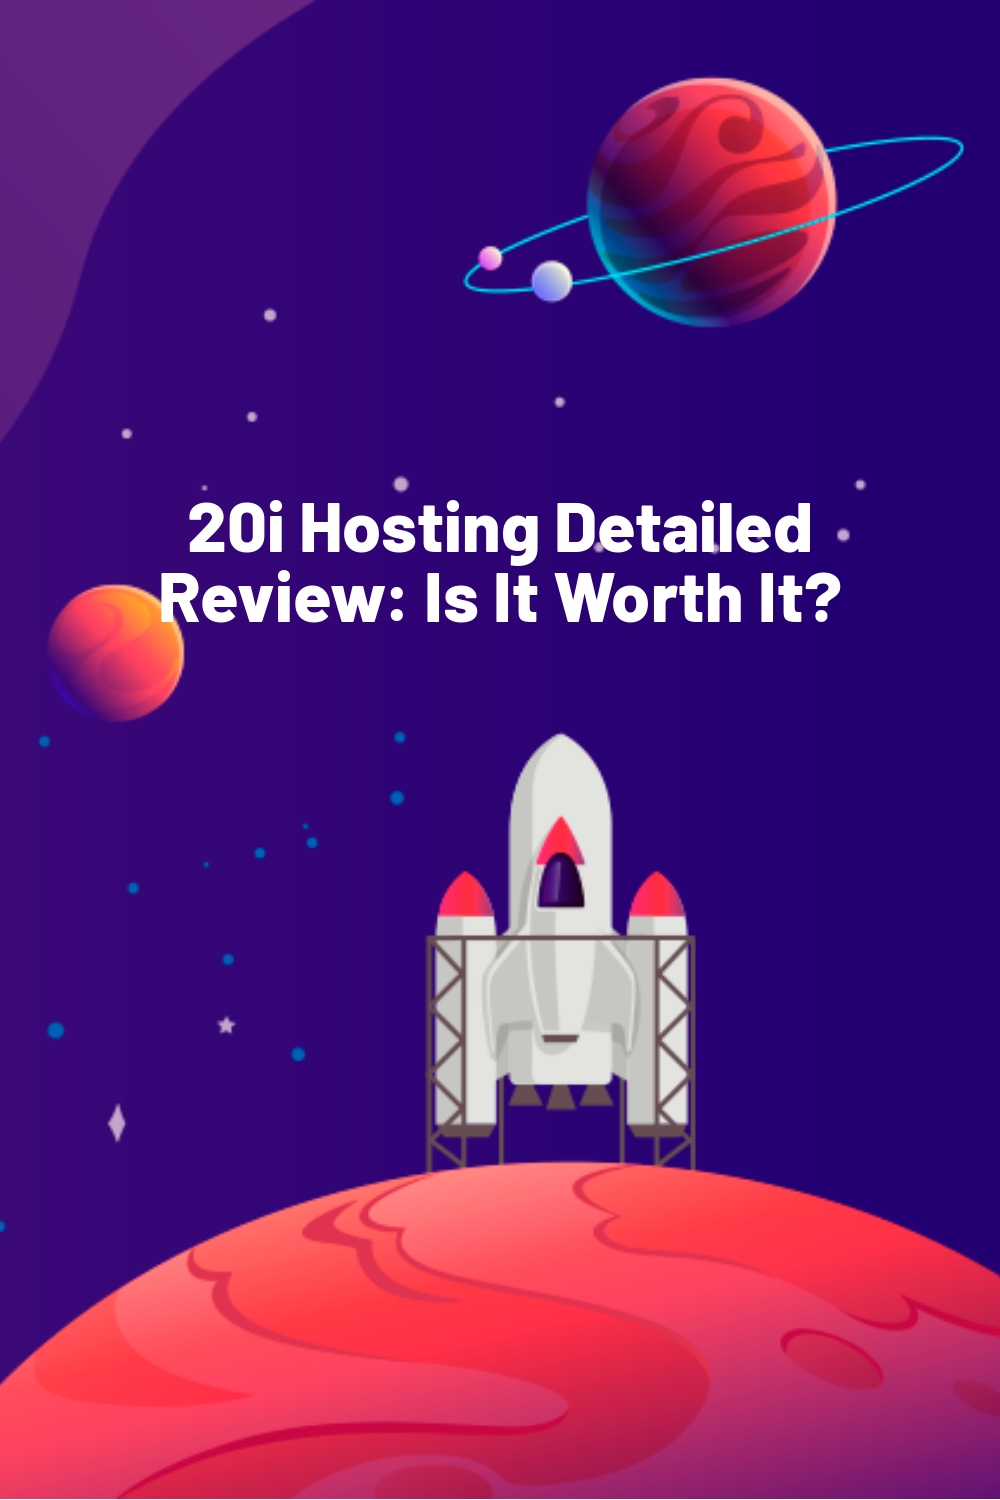 20i Hosting Detailed Review: Is It Worth It?